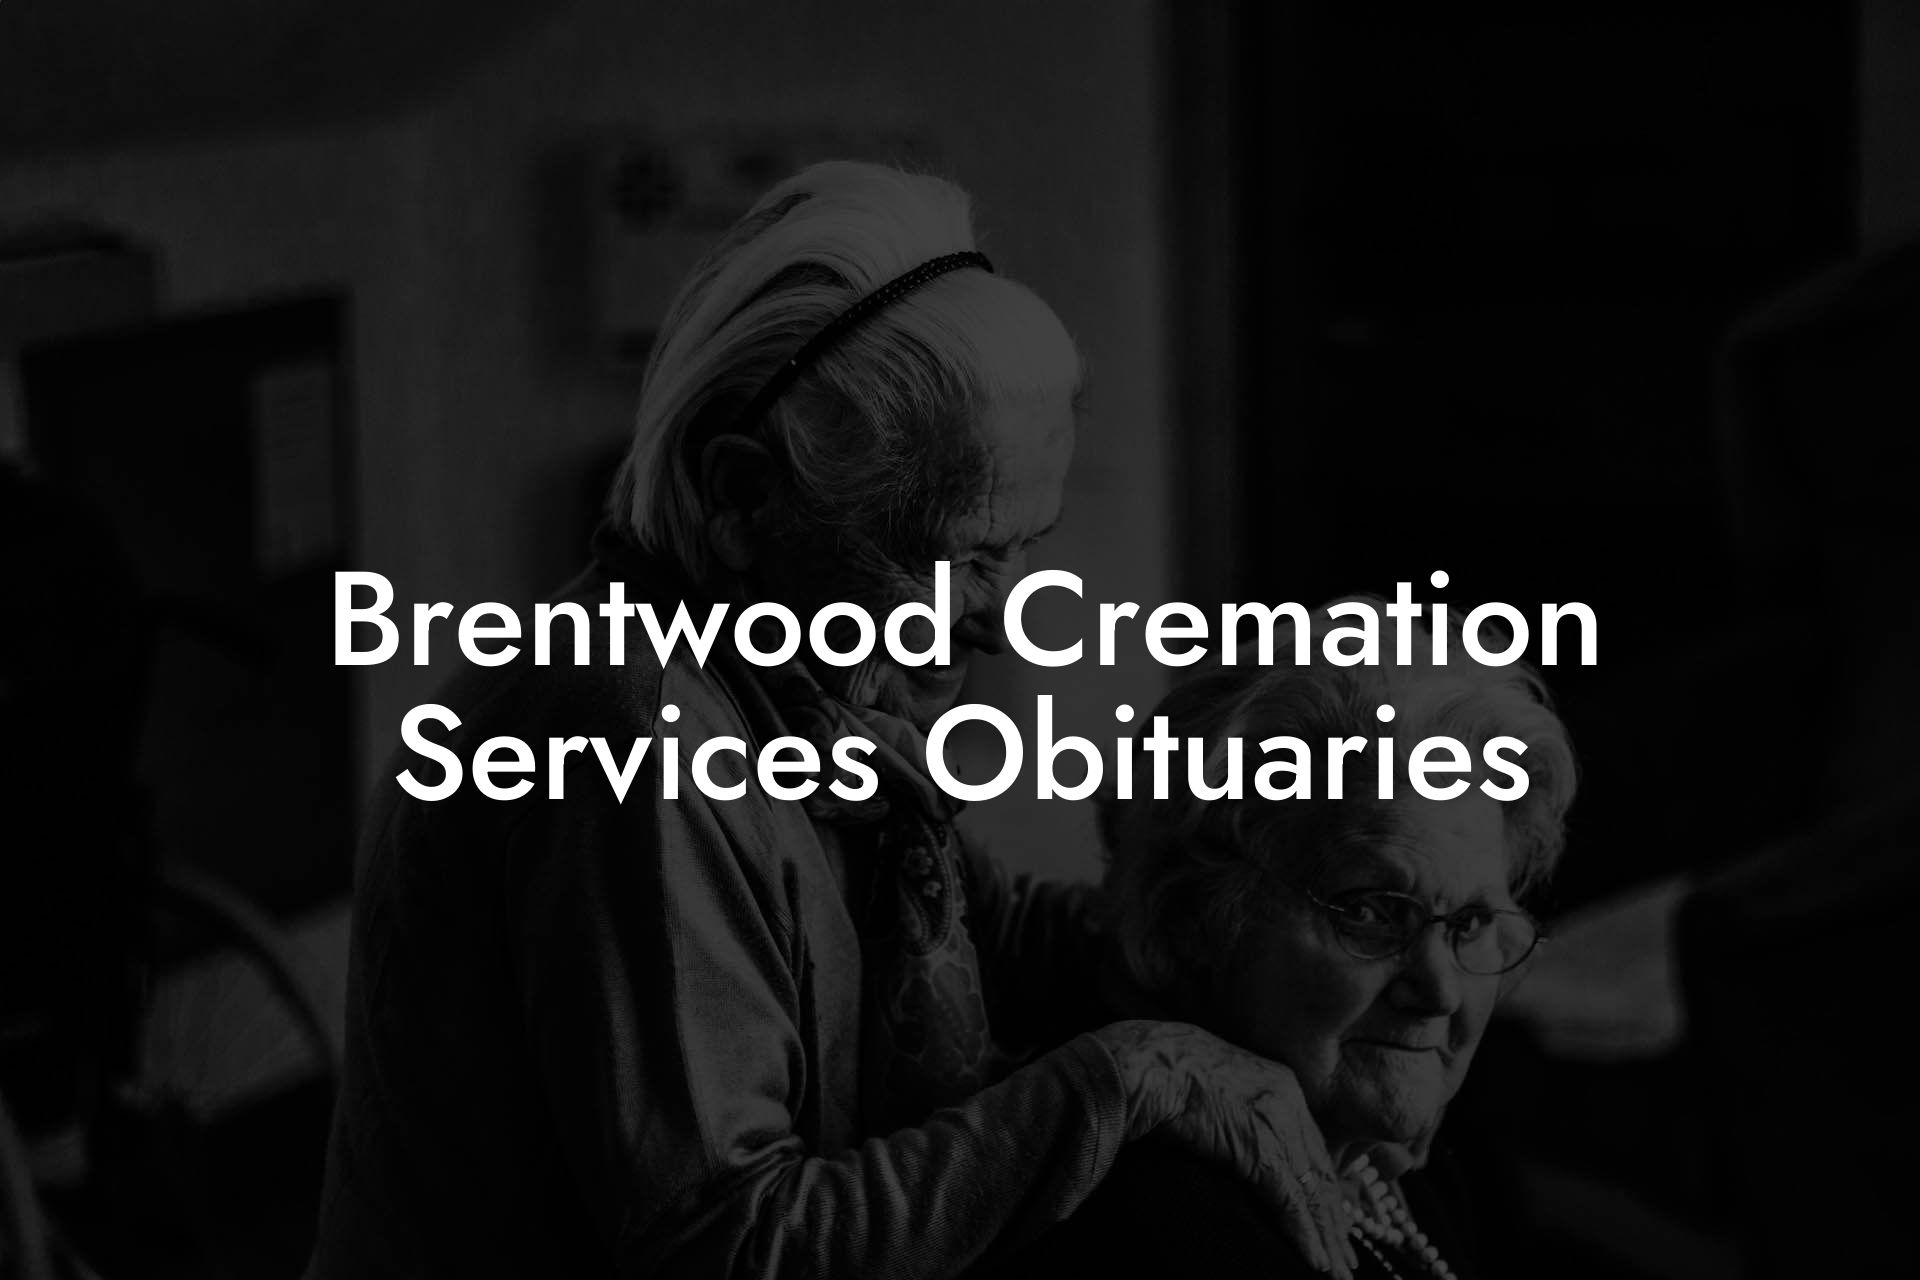 Brentwood Cremation Services Obituaries